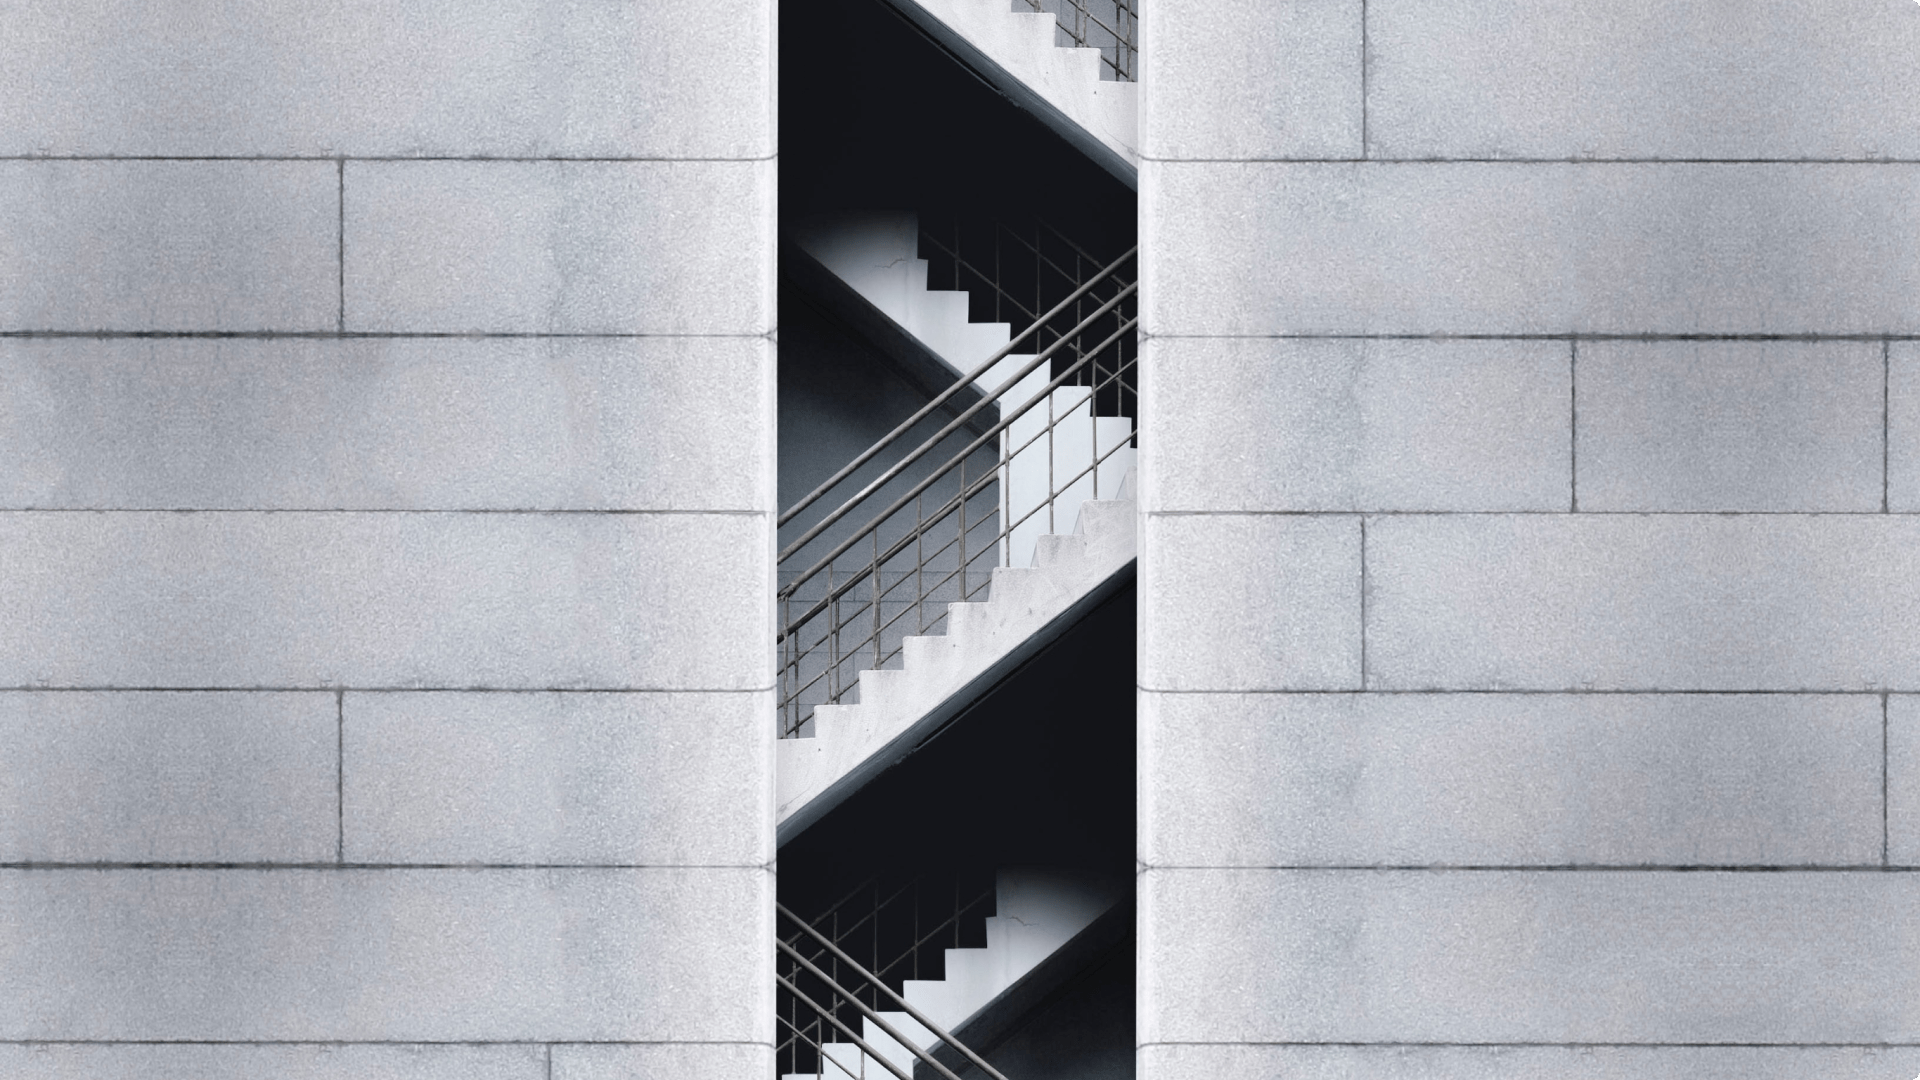 Abstract image of staircase in black and white